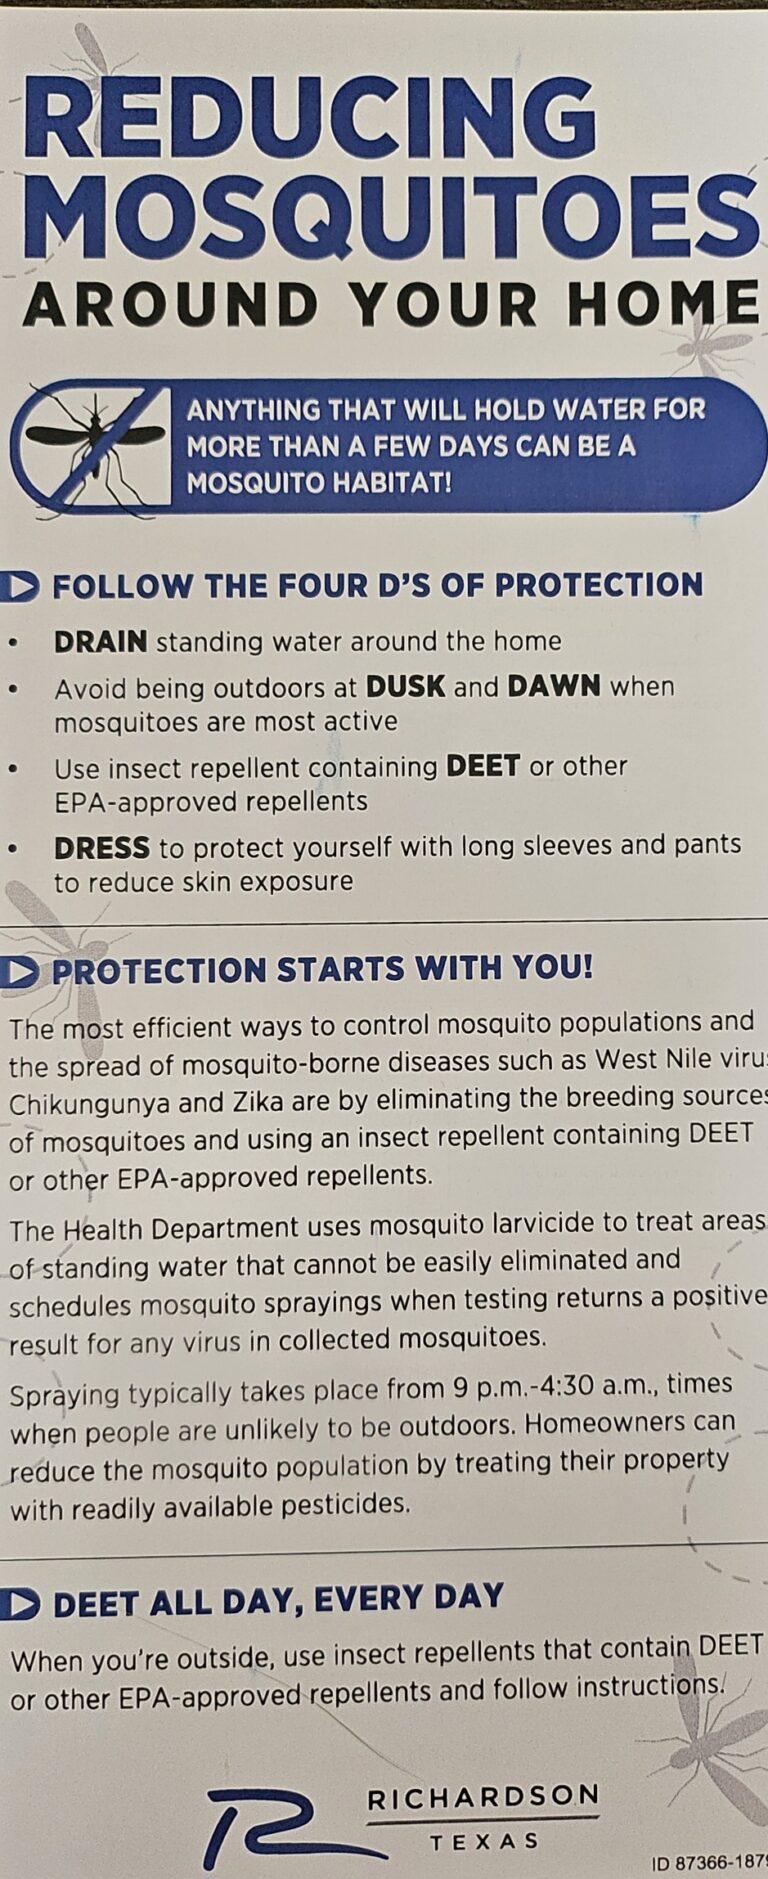 How to Reduce Mosquitos